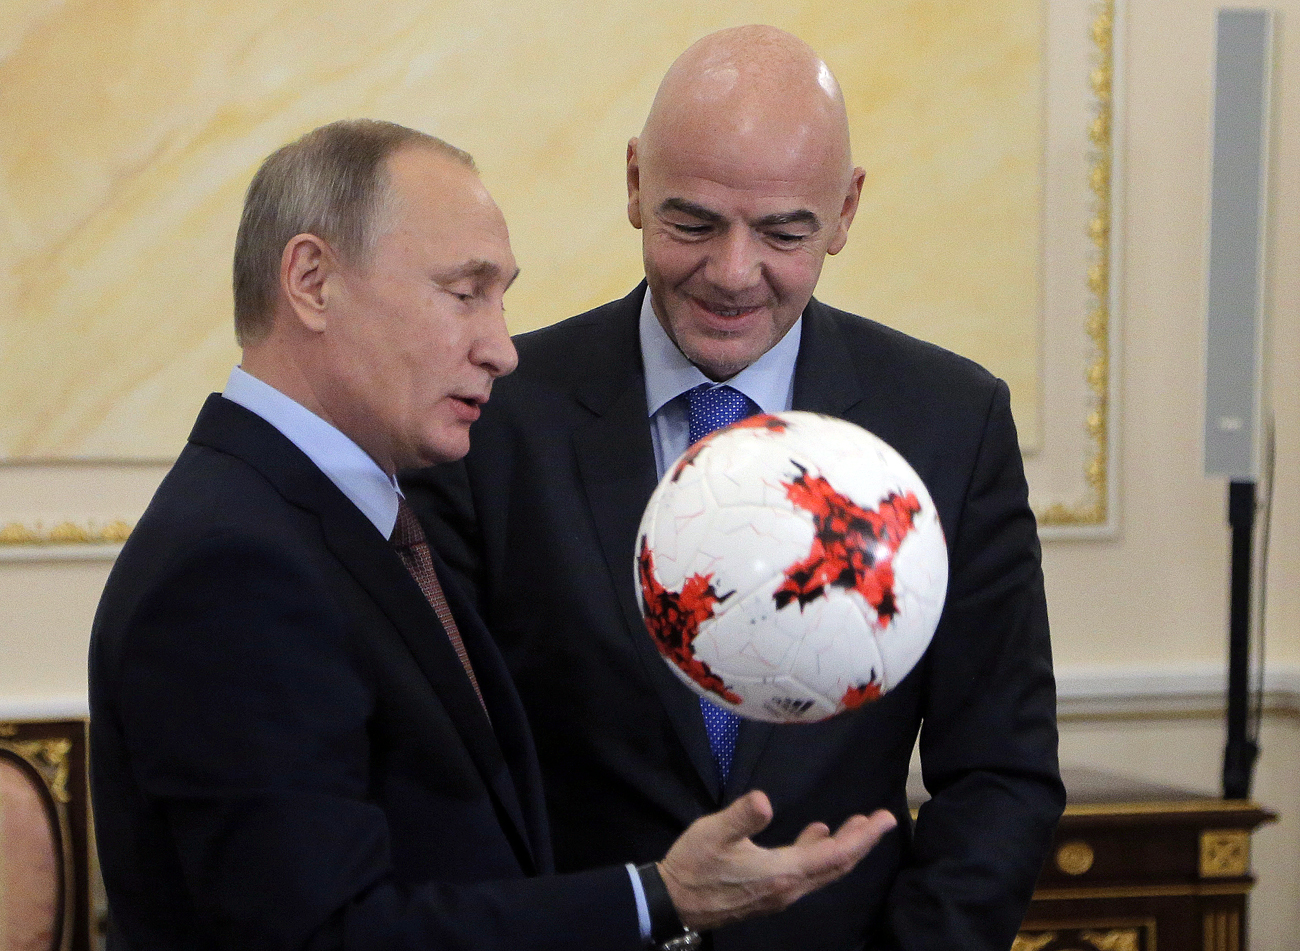 Russian President Vladimir Putin (L) receives an official match ball for the 2017 FIFA Confederations Cup from FIFA President Gianni Infantino during a meeting at the Kremlin in Moscow, Russia